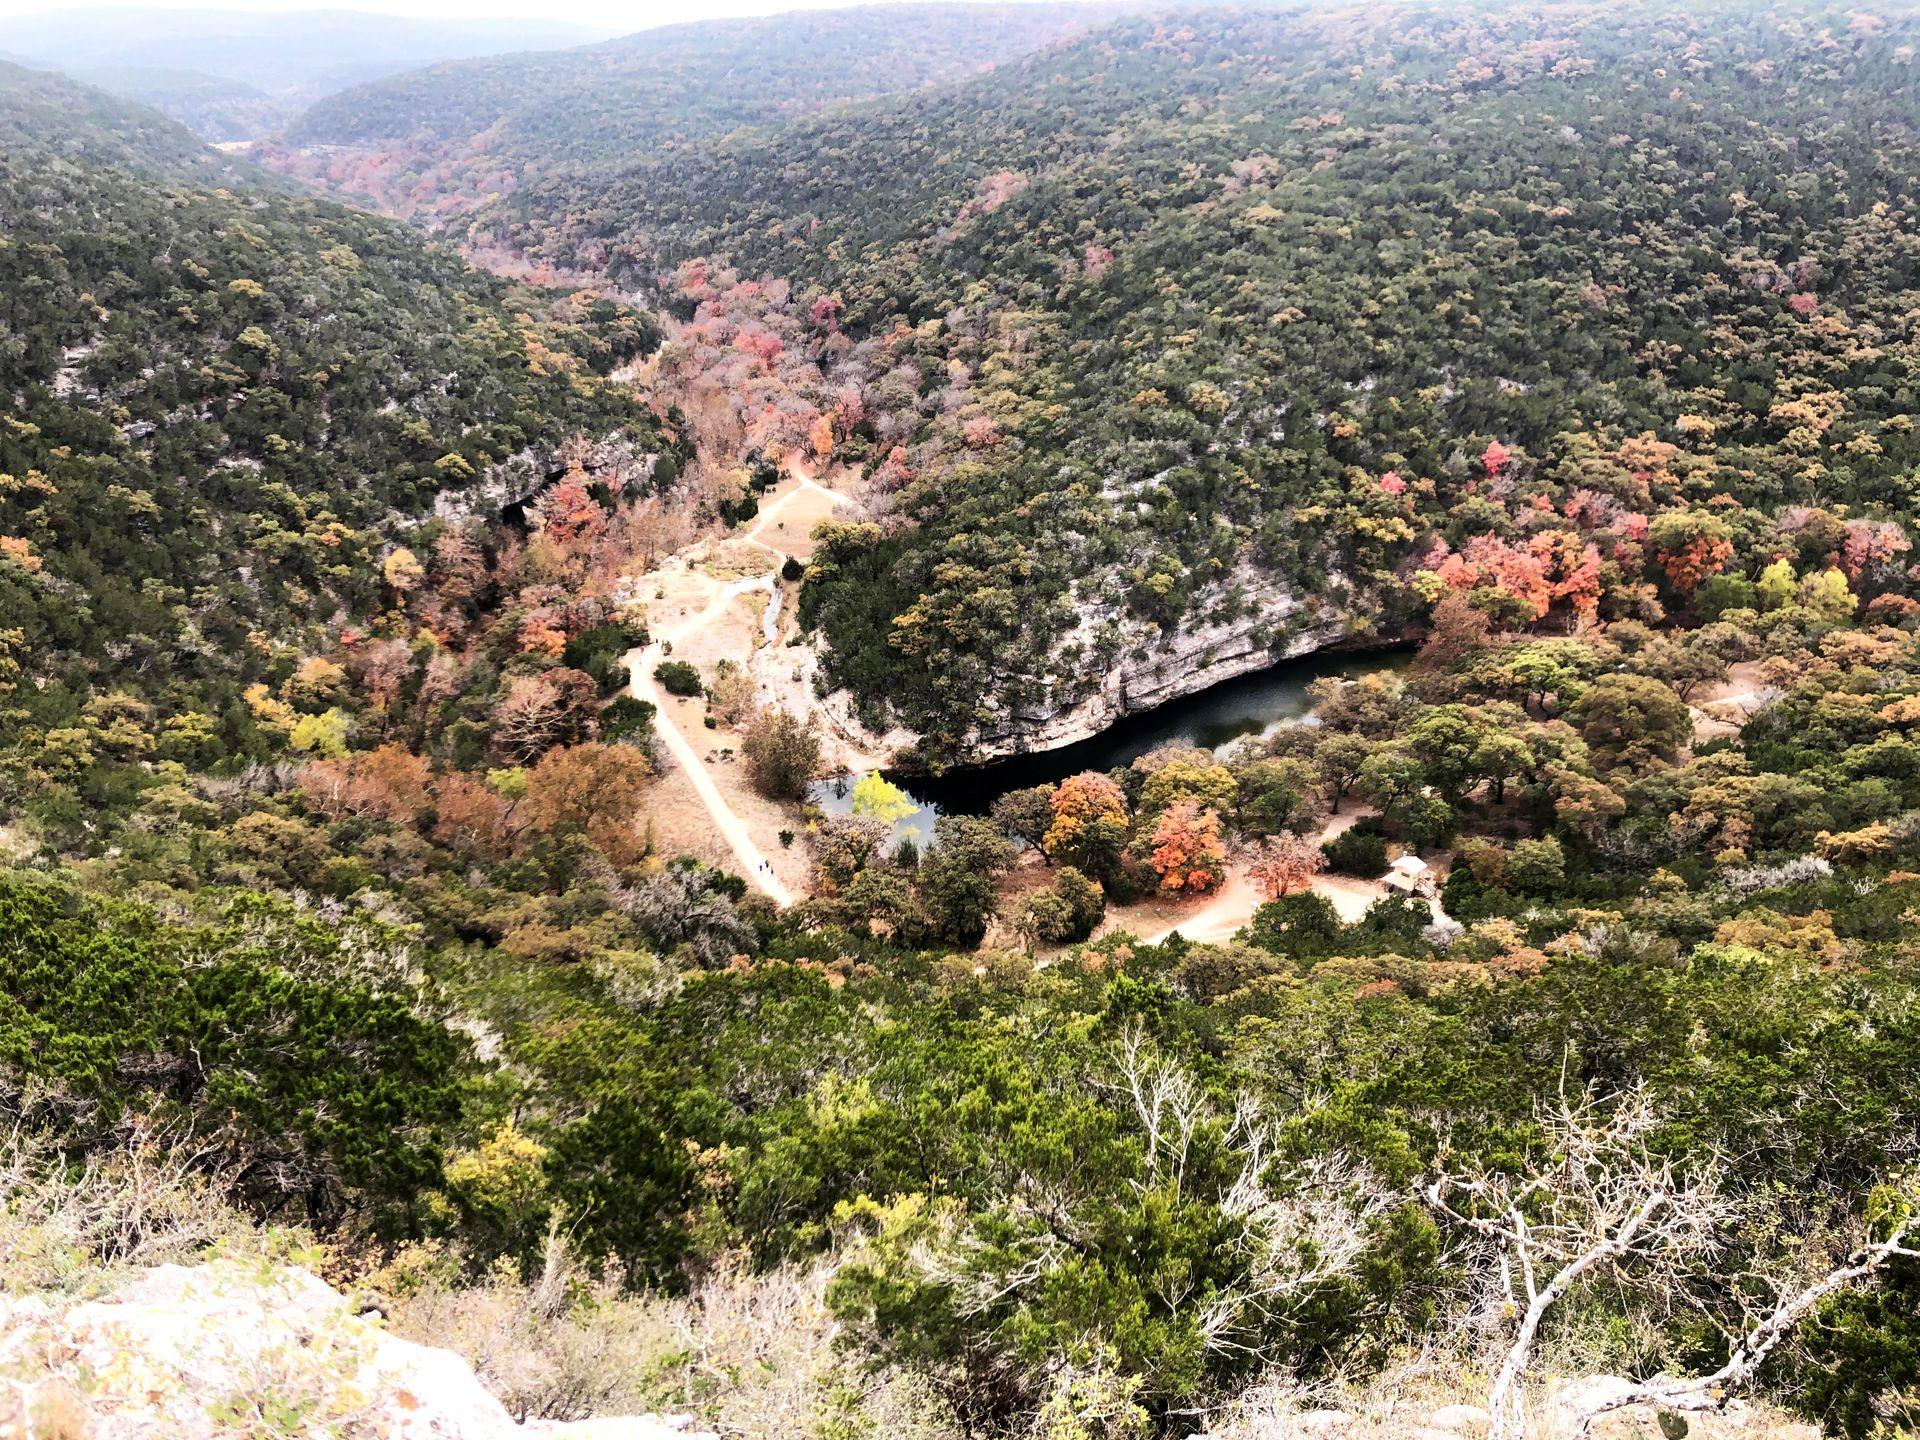 An overlook view in Lost Maples with a river and hills covered in trees.